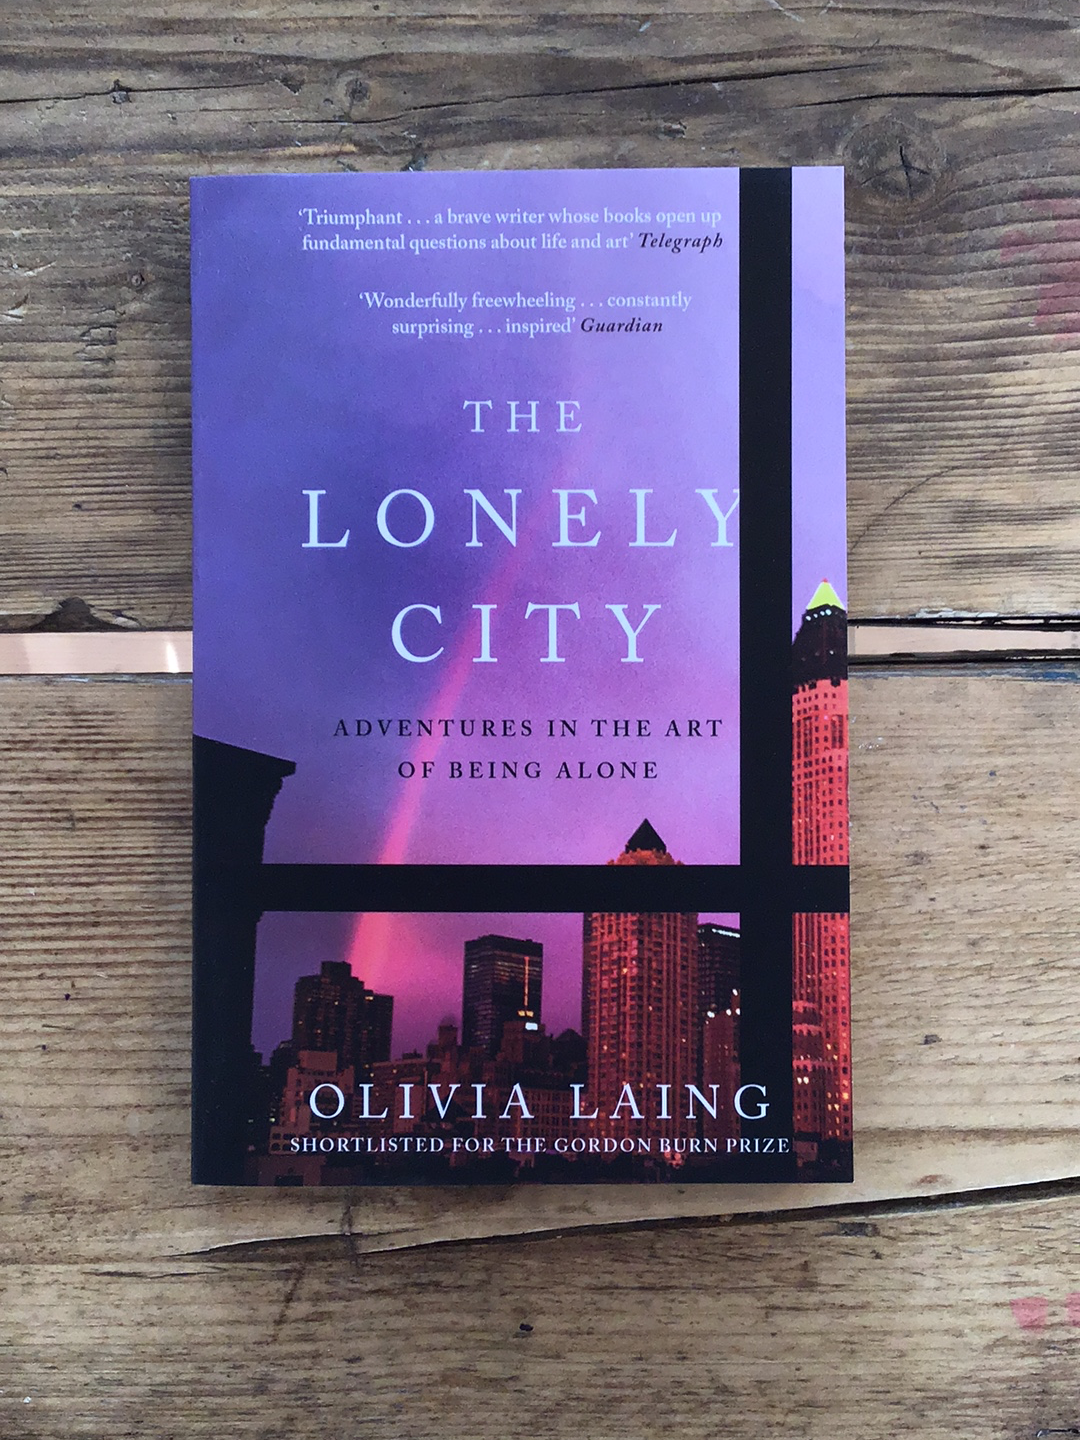 The Lonely City : Adventures in the Art of Being Alone